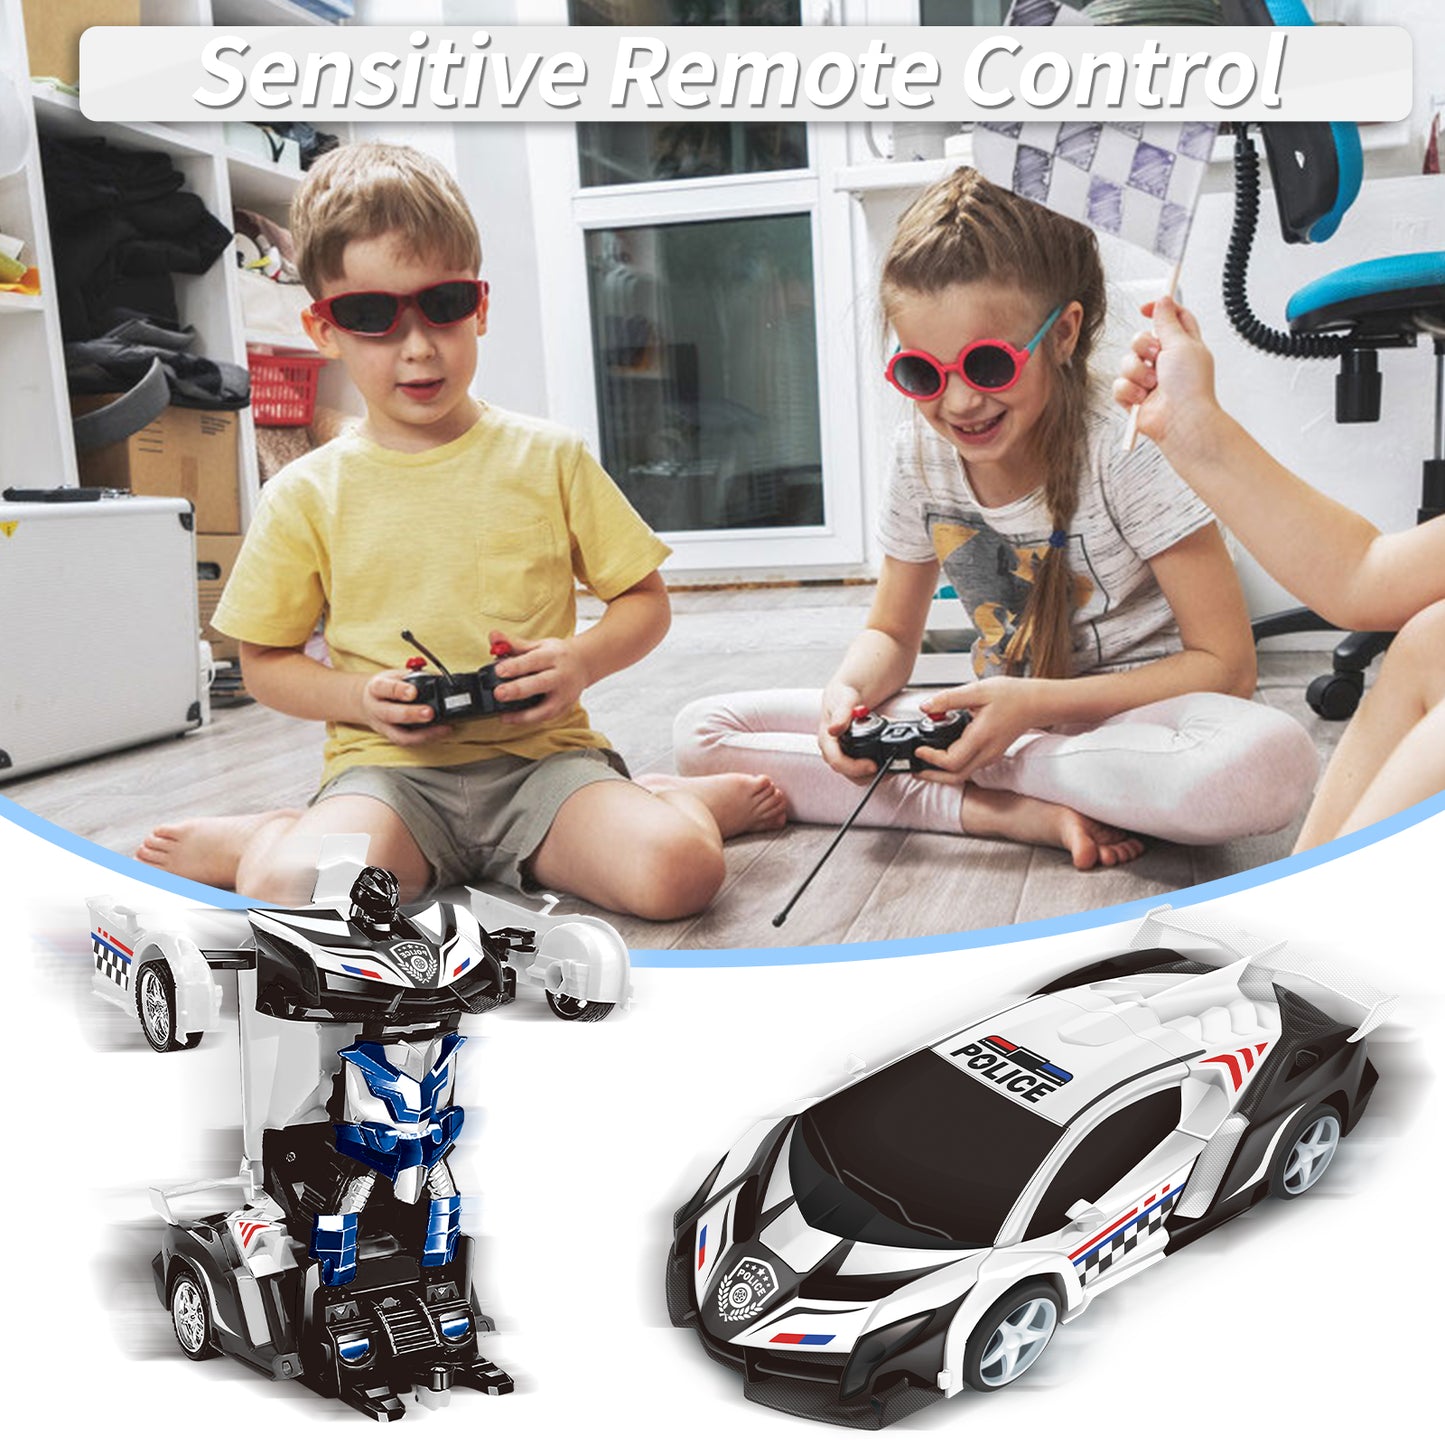 Remote Control Car Transform Car Robot Toy for Kids,1:18 Scale High Speed RC Cars Racing Car with 360°Rotating for Boys 3 4 5 6 7 8 9 Years Old Birthday-Police